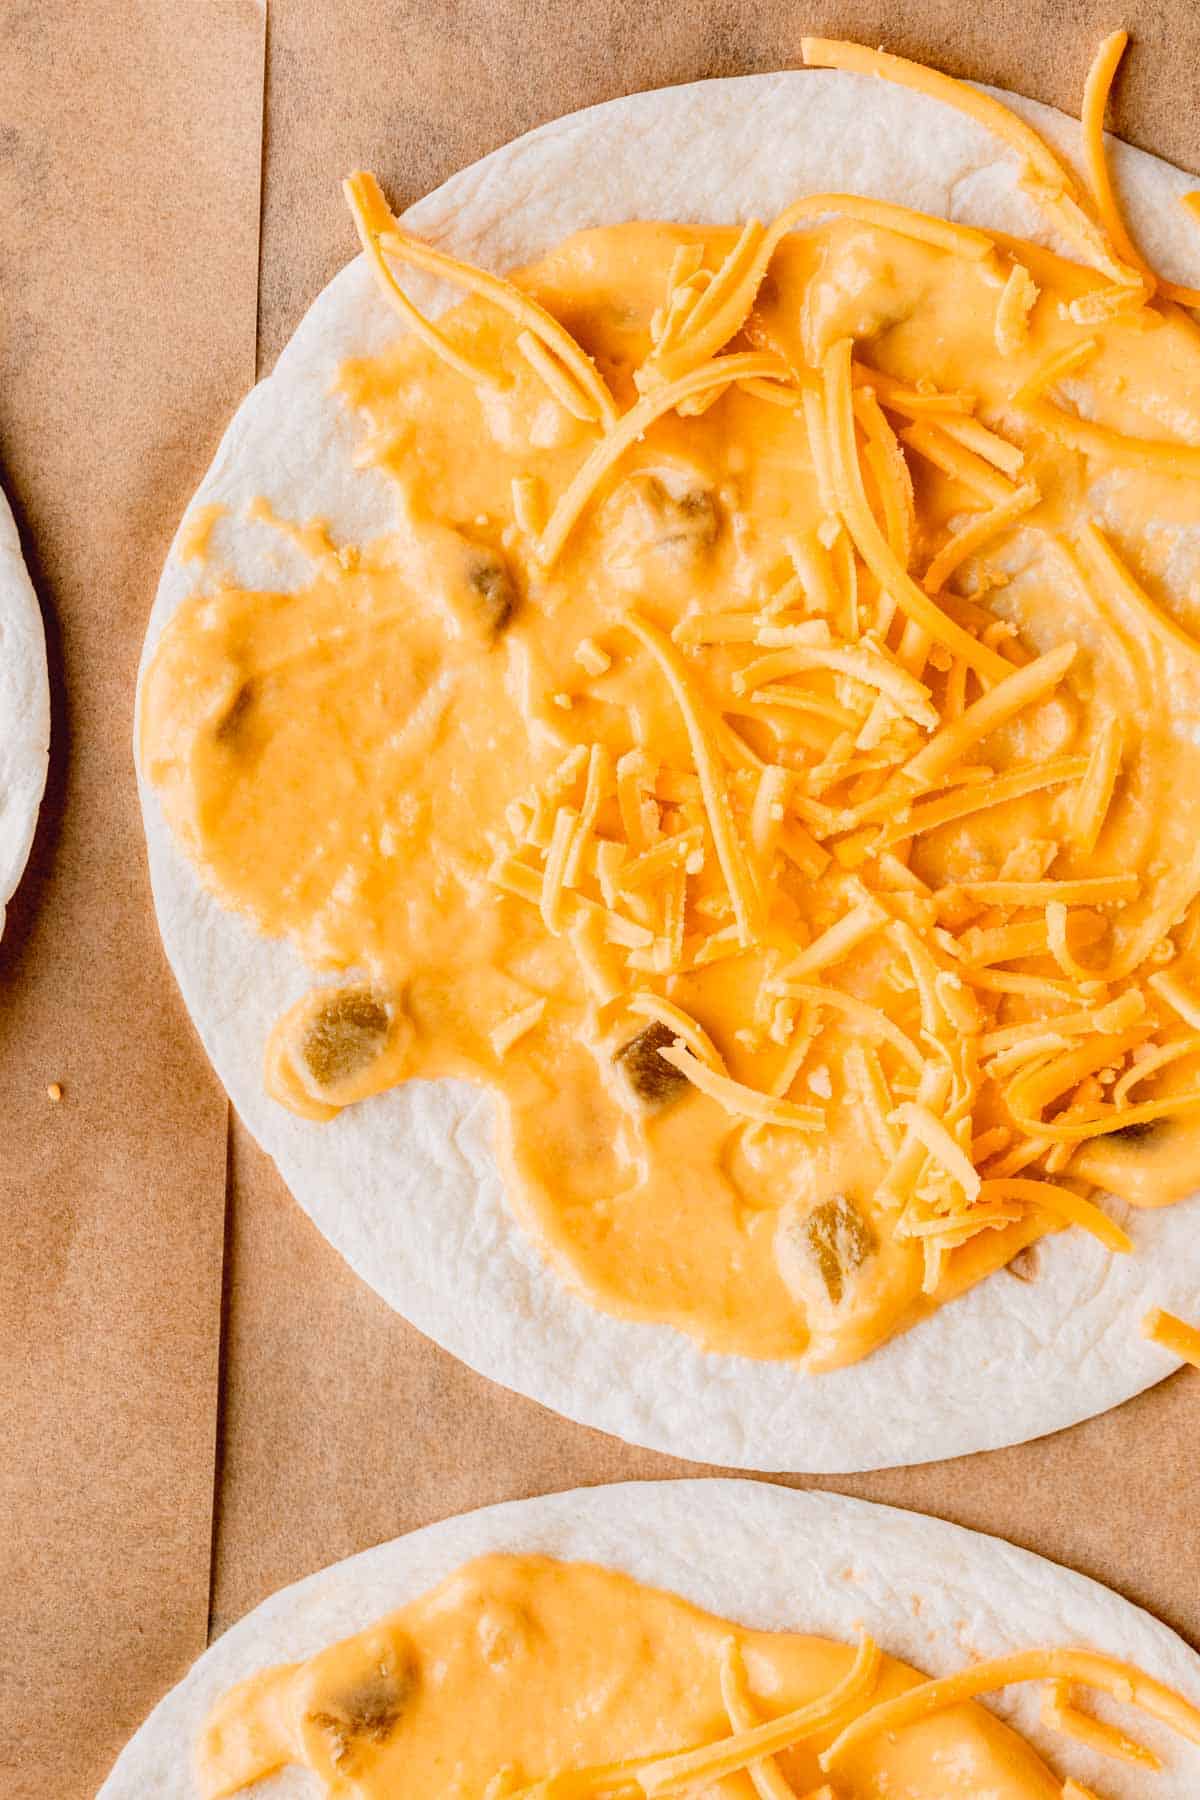 Gordita shells smeared with cheese sauce and topped with shredded cheese.